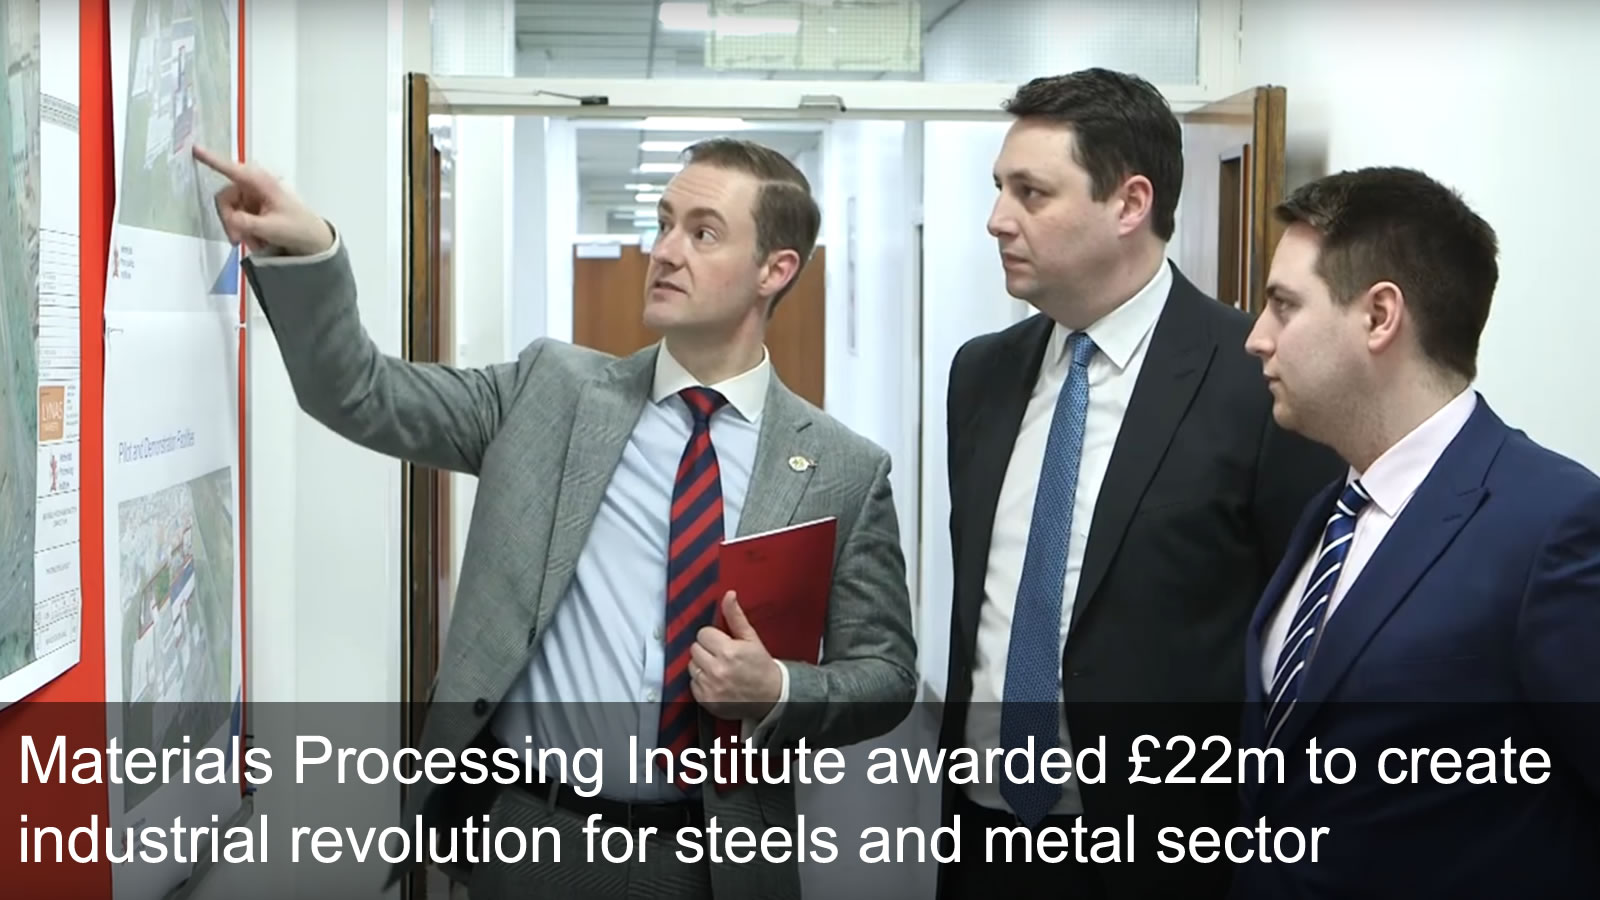 Materials Processing Institute awarded £22m to create industrial revolution for steels and metal sector - March 2020